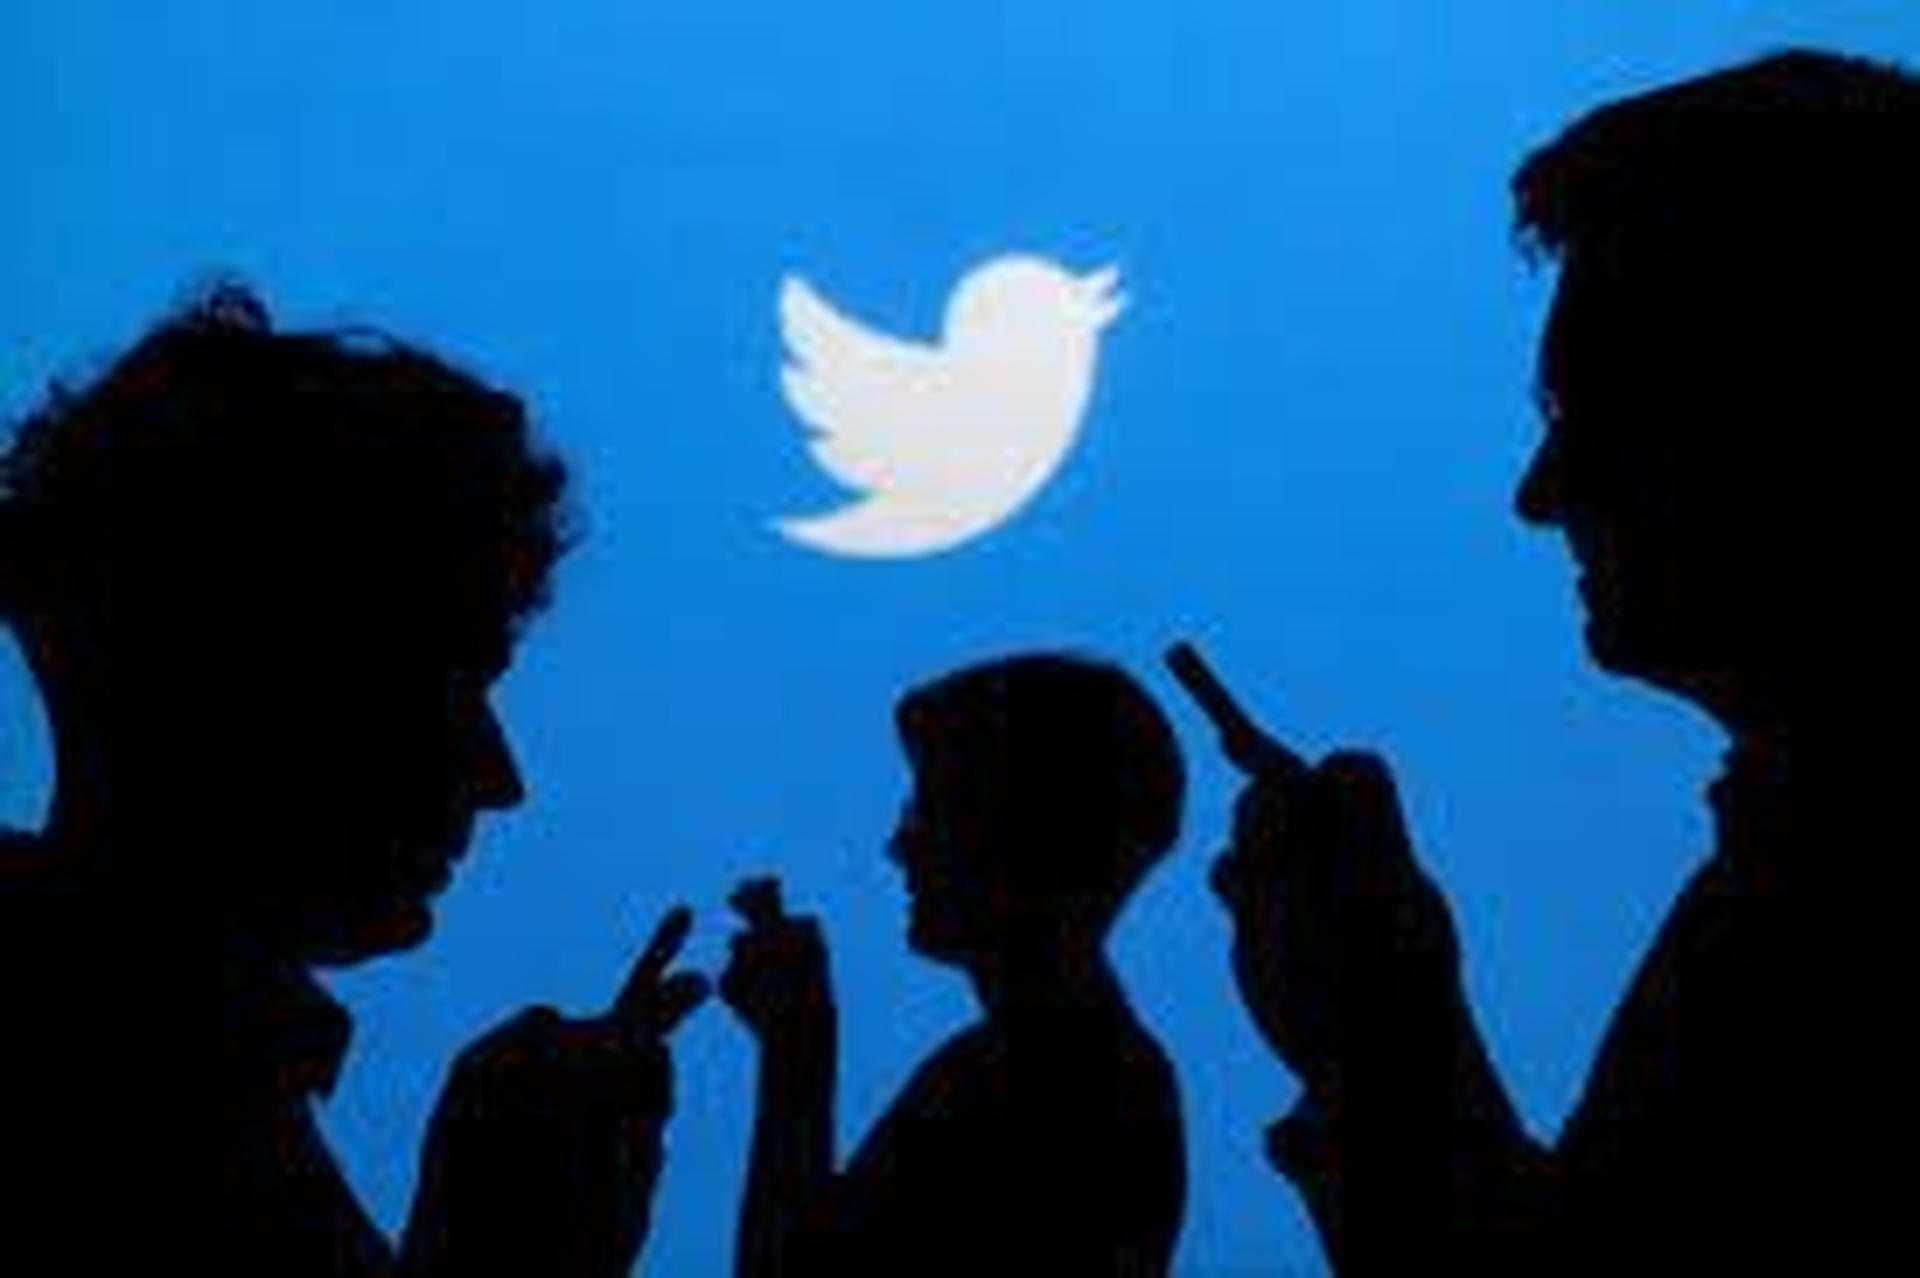 In this article, we will cover Twitter to pay 150M dollars over privacy violations, after using users' security data to target ads, violating a 2011 order by the Federal Trade Commission.